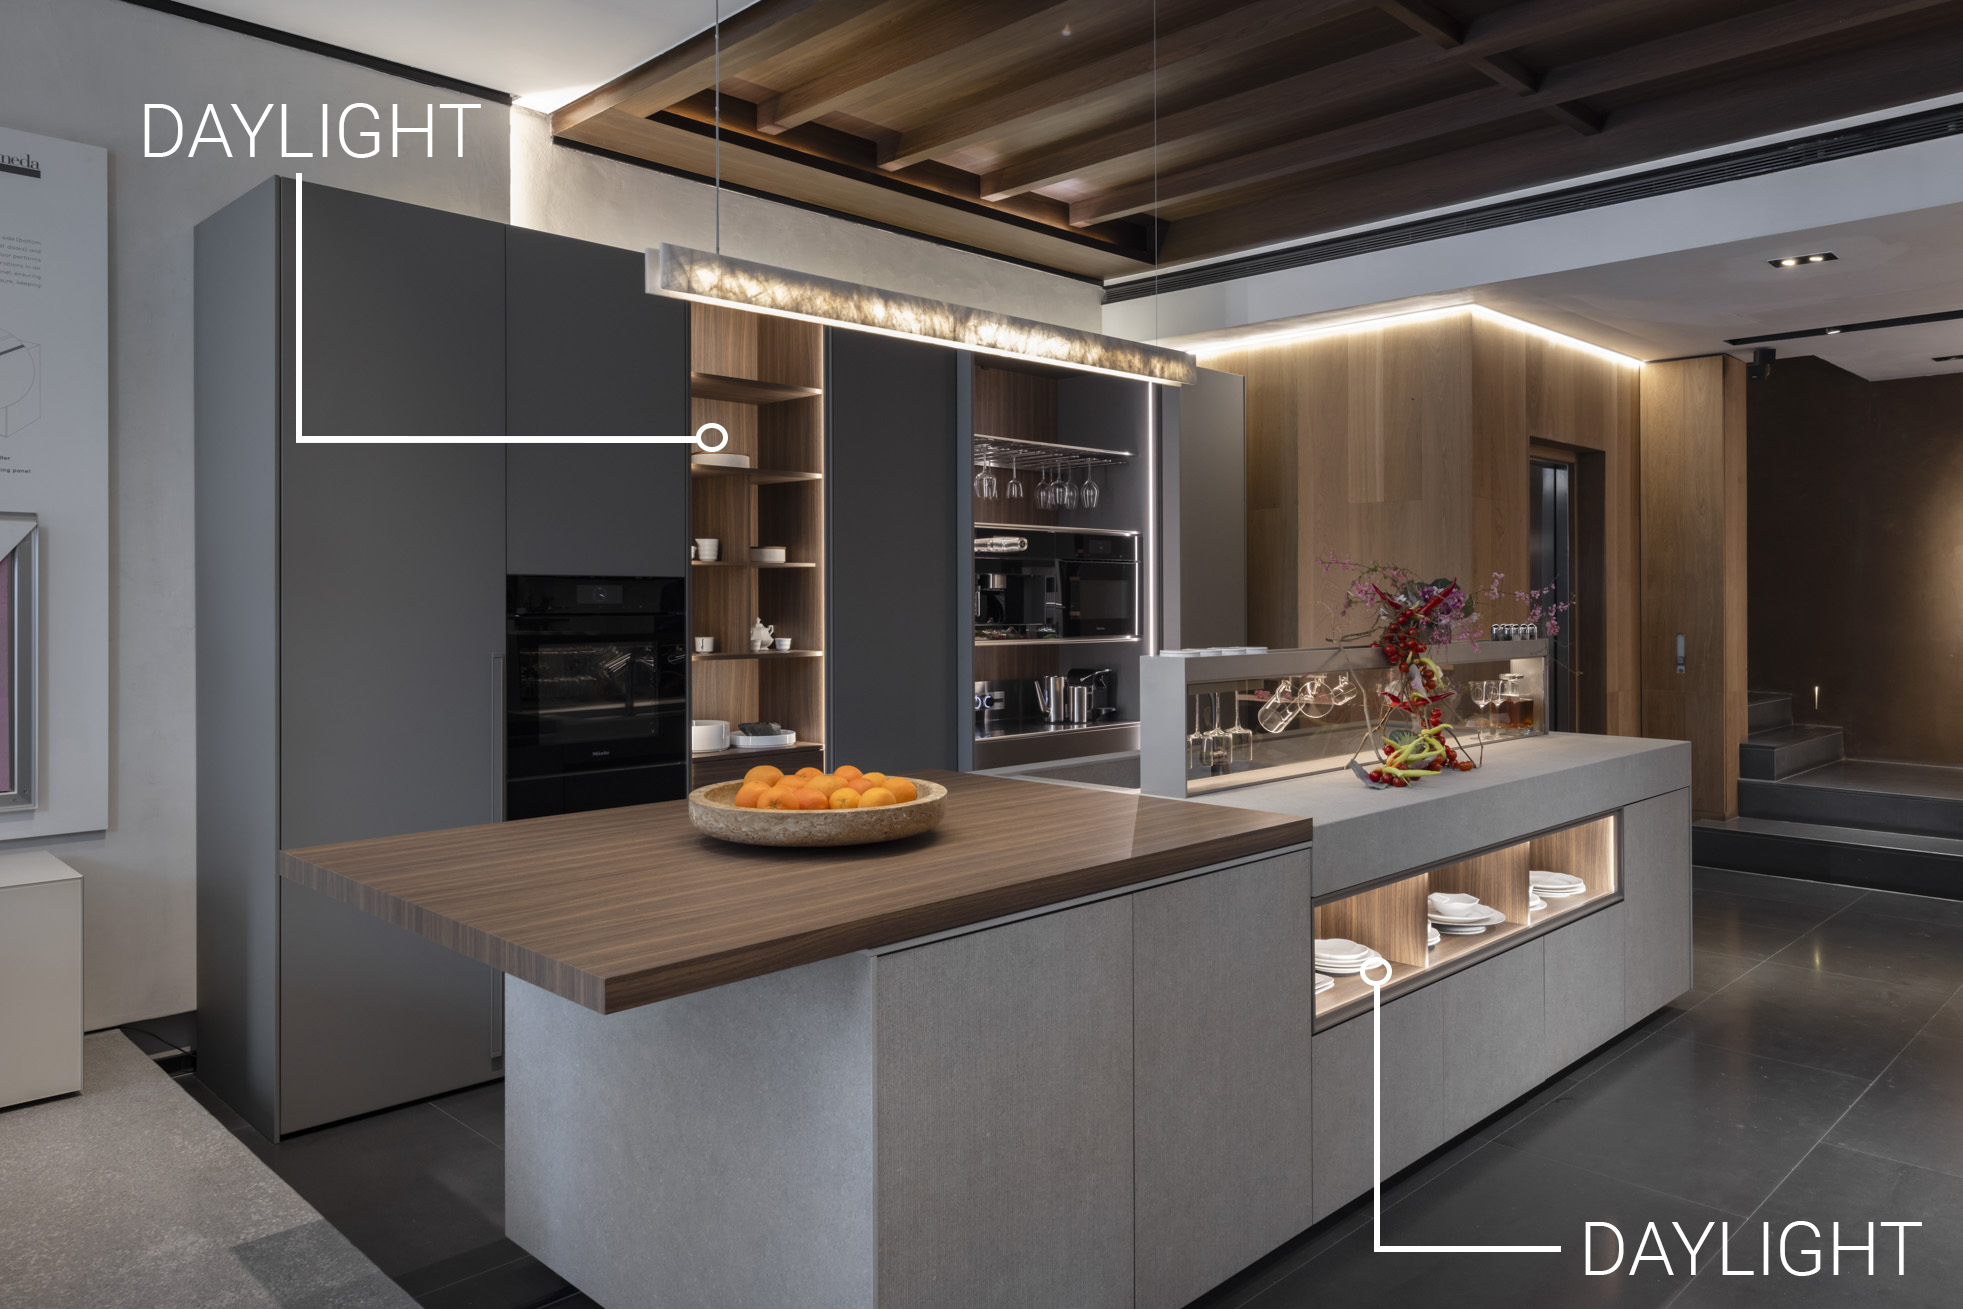 Create a harmonious style across your spaces: the Daylight system in your home design